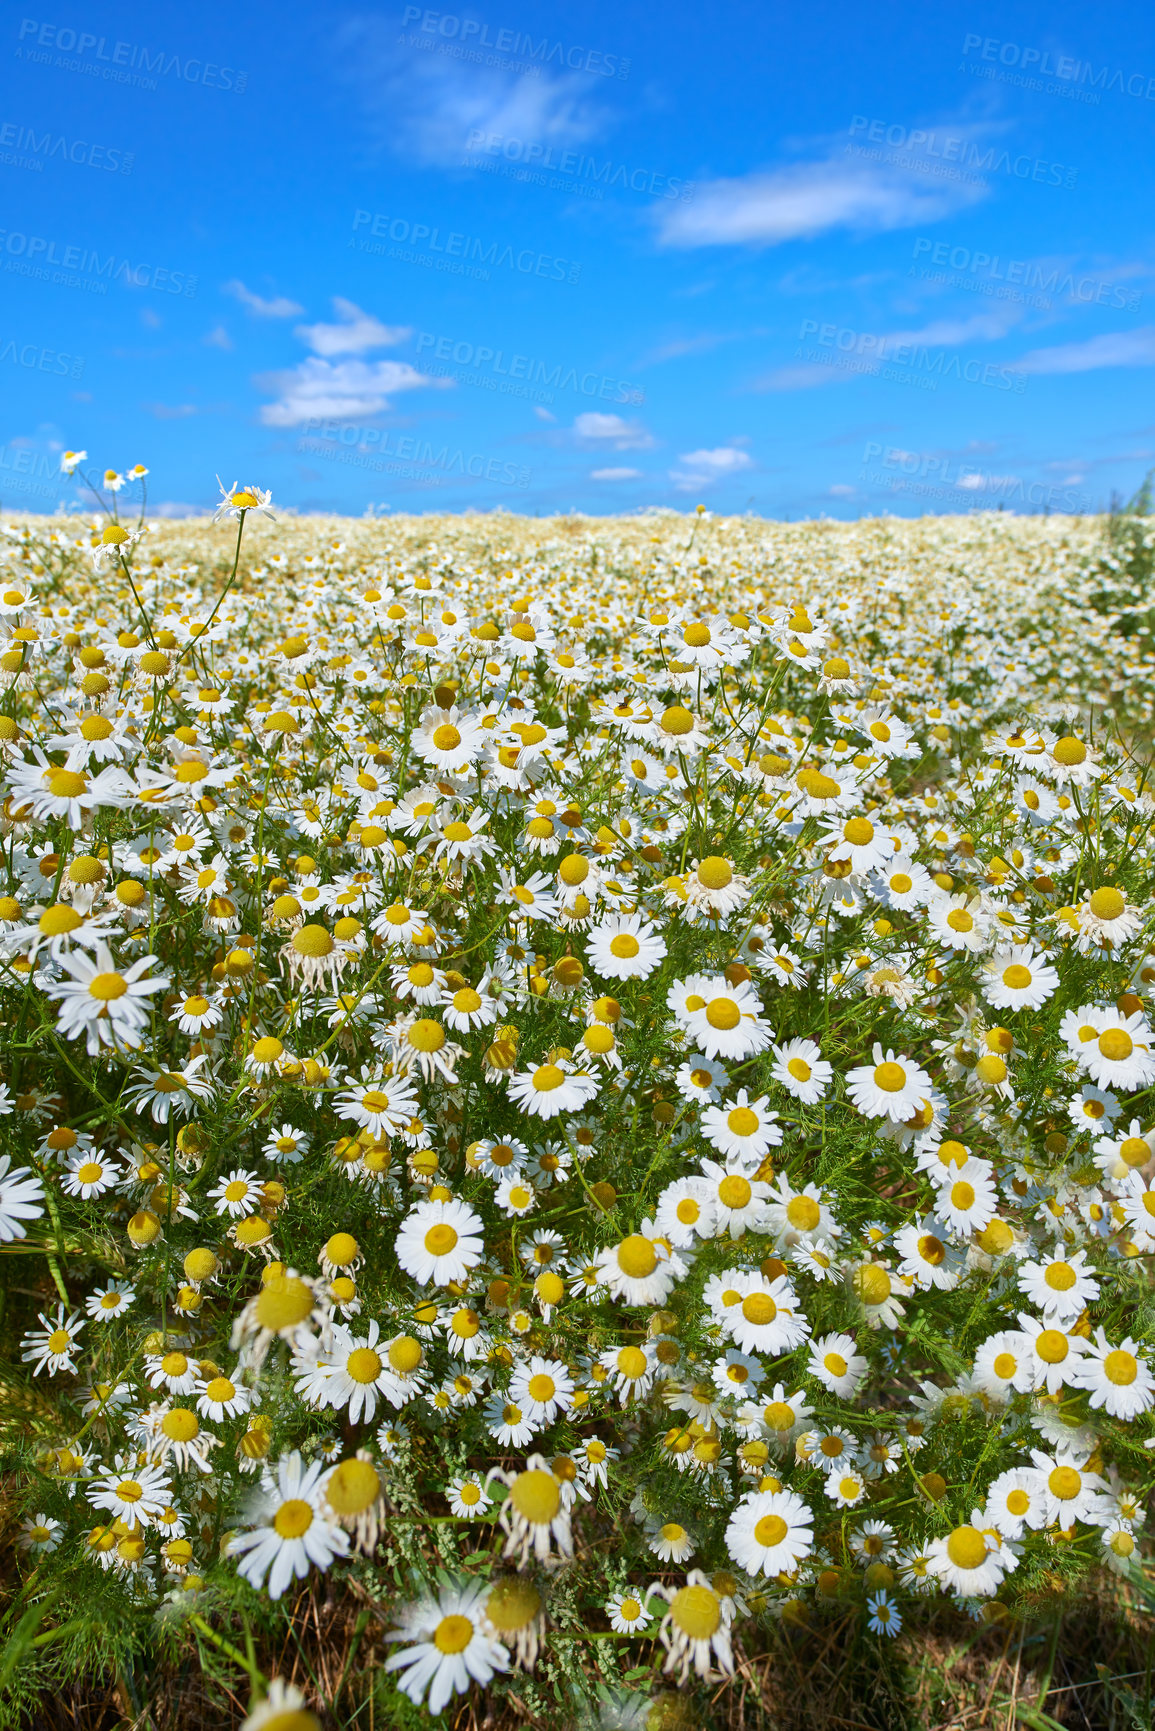 Buy stock photo Chamomile, field or meadow with grass for flowers, plants or sustainable growth in environment. Sky in background, outdoor or landscape of nature, lawn or natural pasture for white daisies or ecology